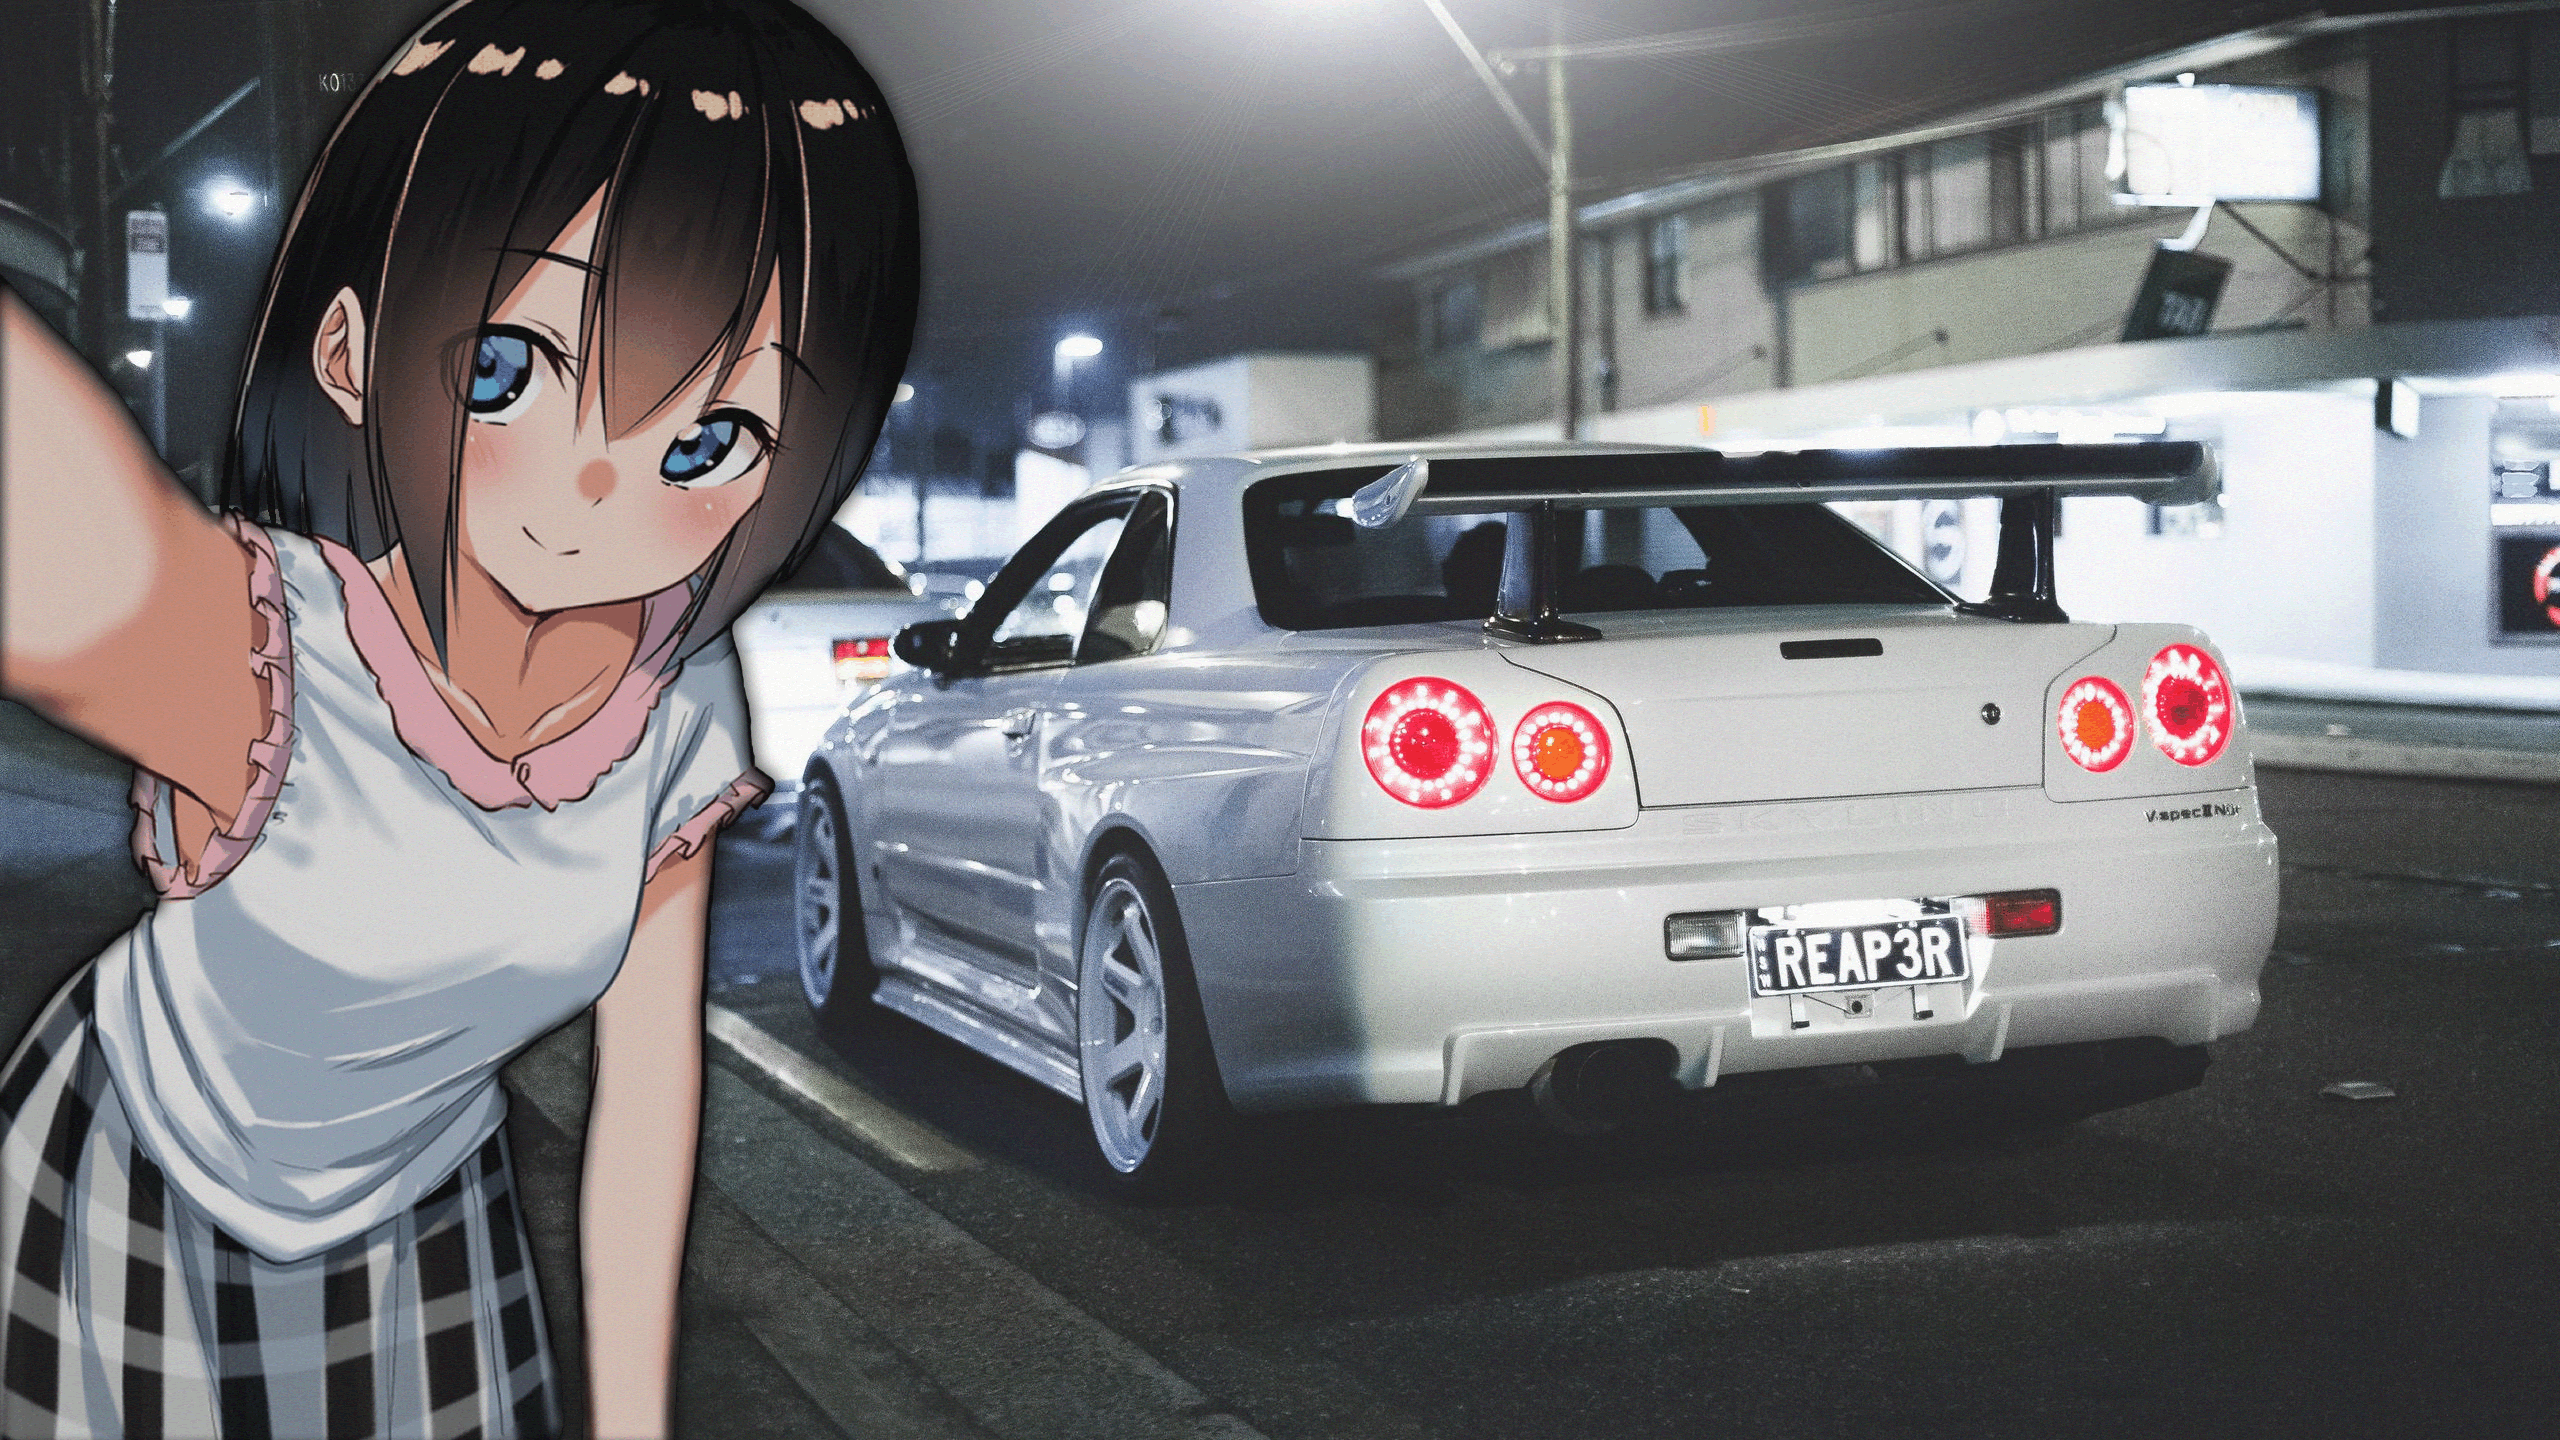 GTR R34 JDM Anime Girls Selfies Car Picture In Picture Vehicle Anime Blue Eyes Brunette White Cars S Wallpaper:2560x1440